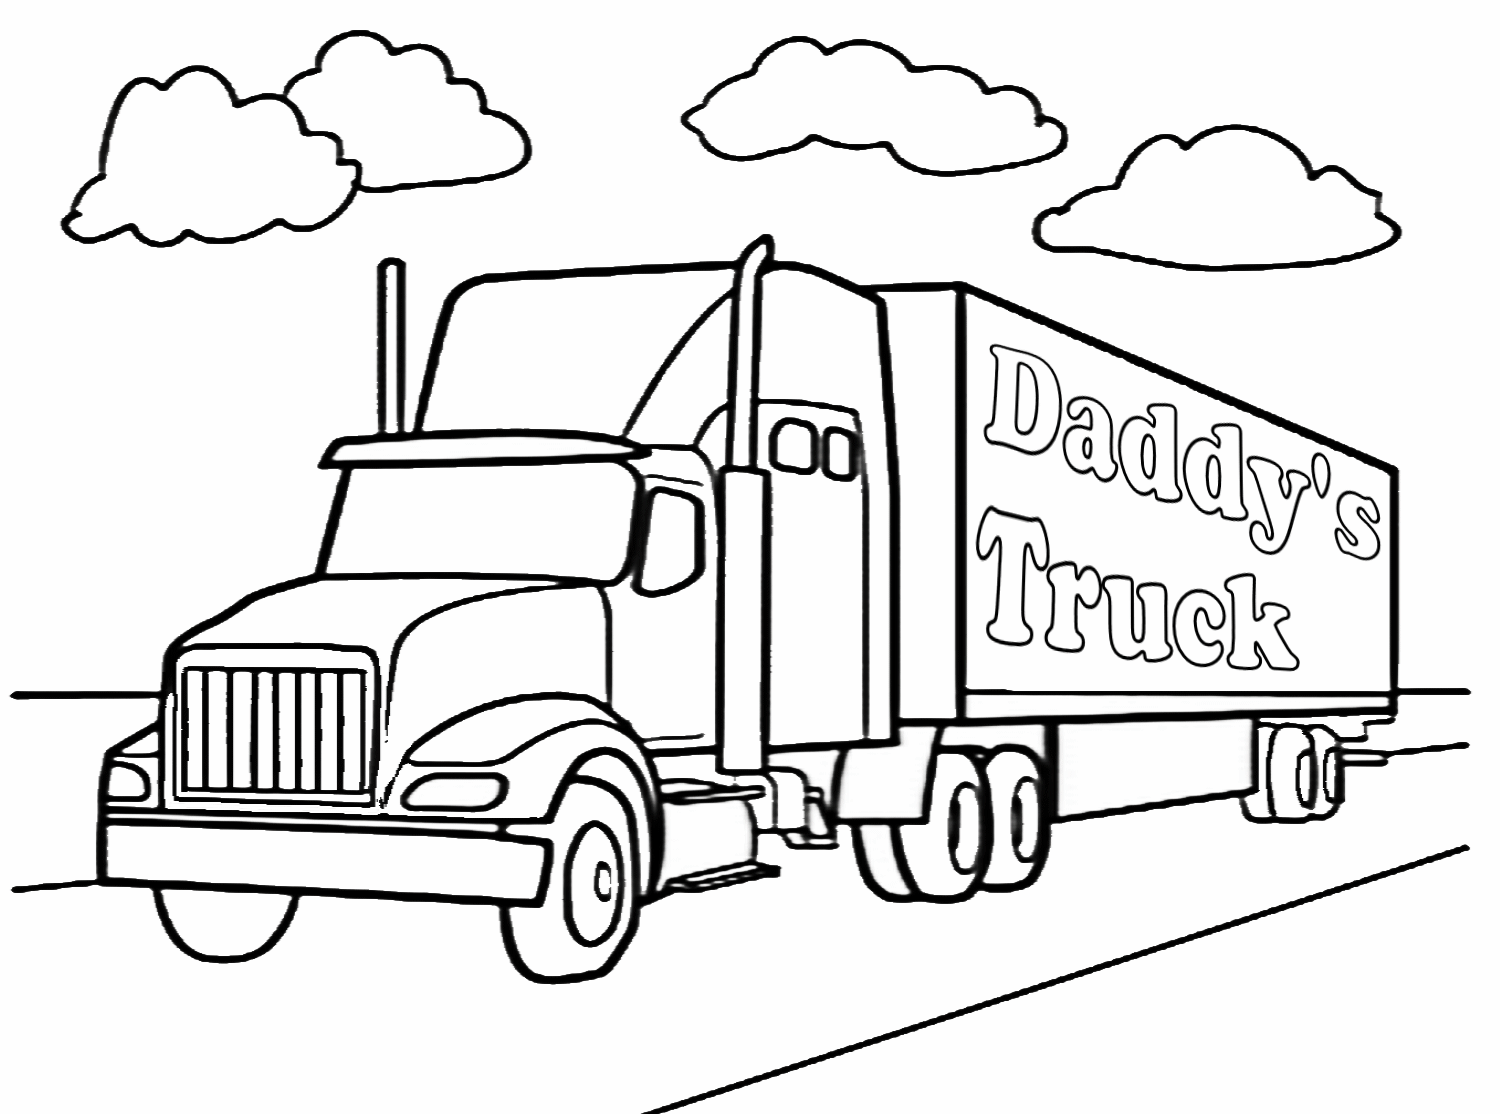 20 Wheeler Coloring Pages   Coloring Home